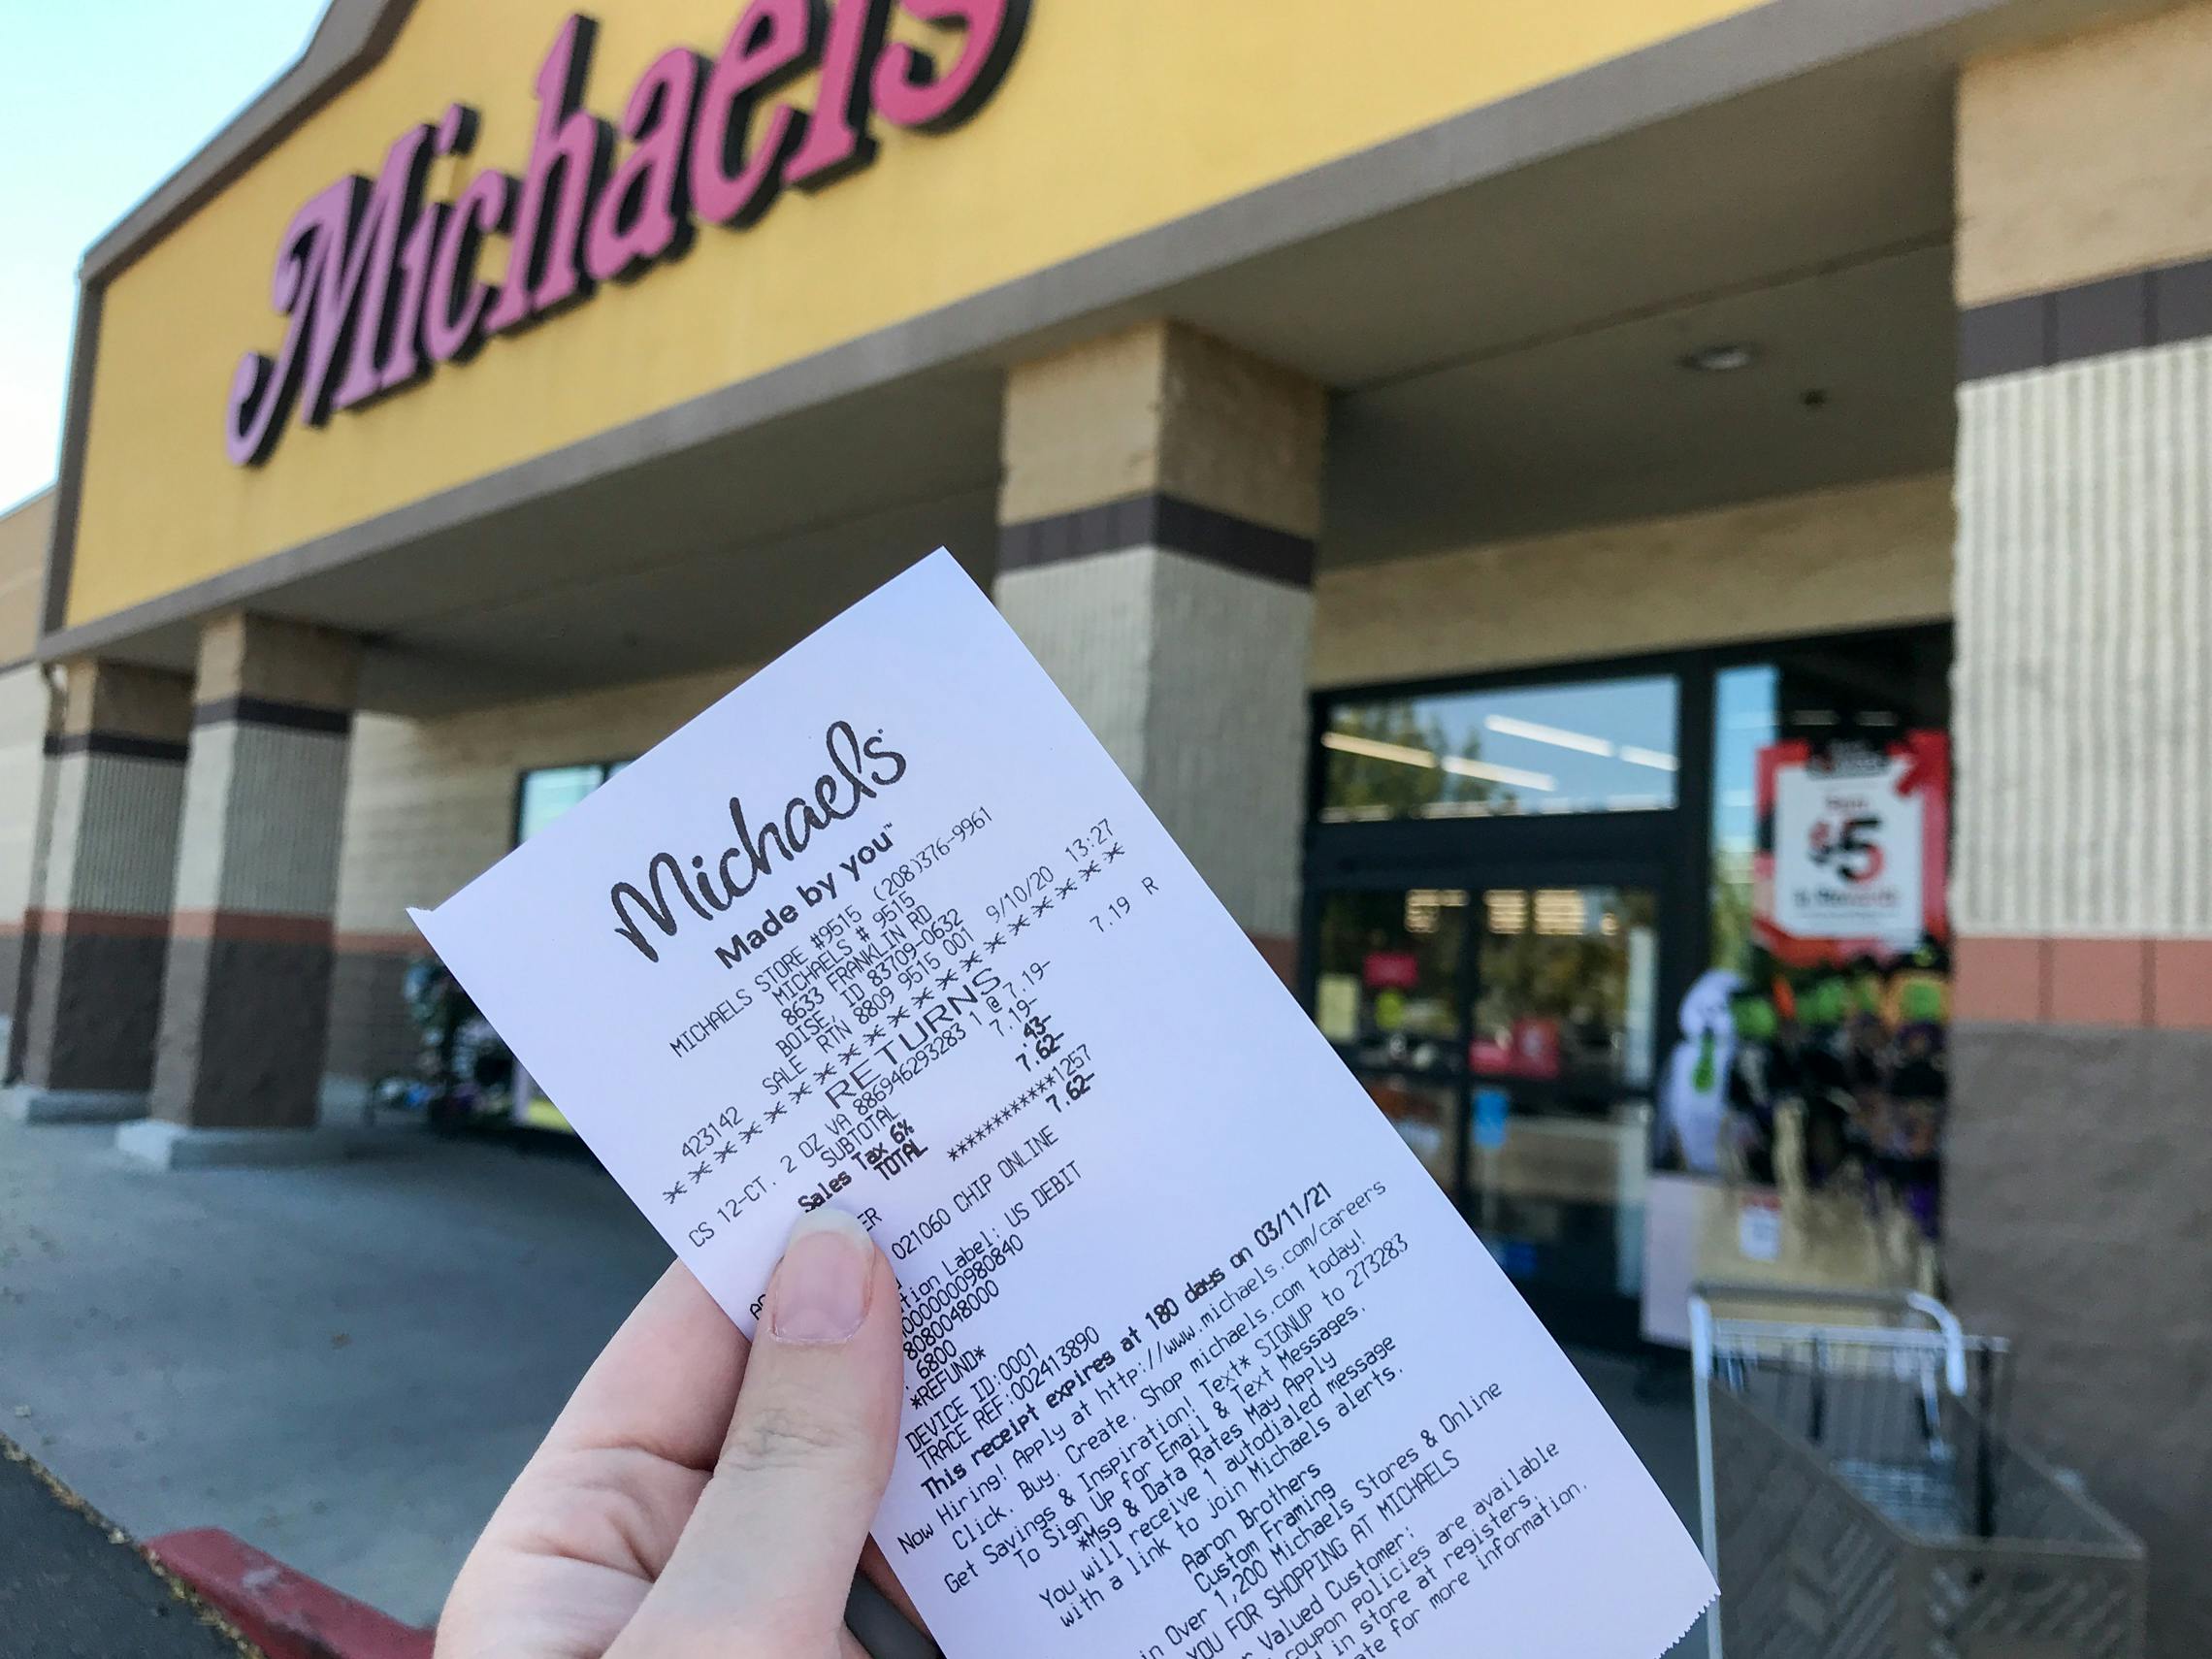 Michaels Store's Hours of Operation